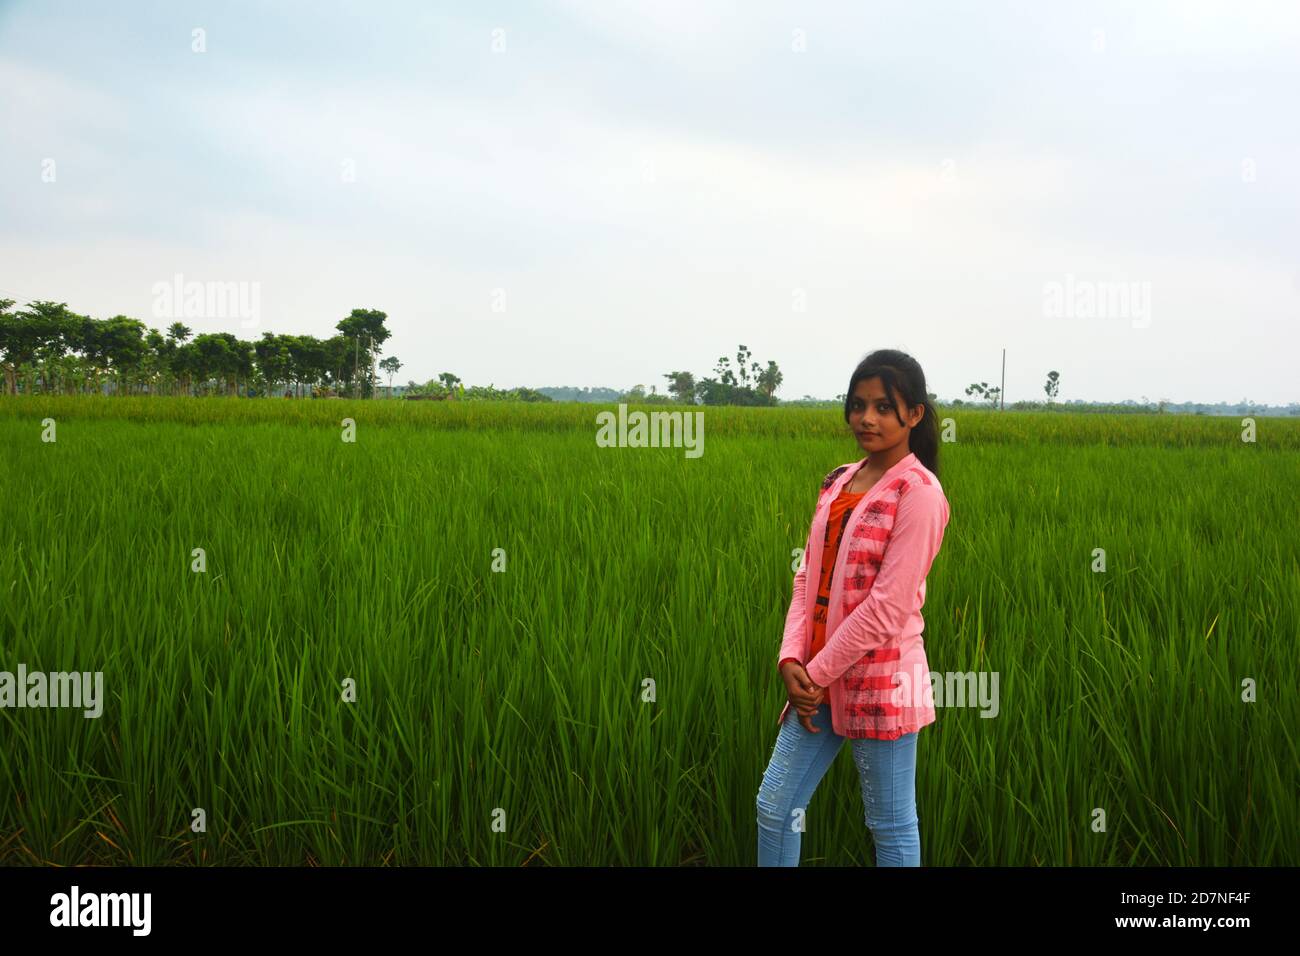 A teenage girl wearing jeans, pink uppers and white shoes standing in a paddy field, selective focusing Stock Photo